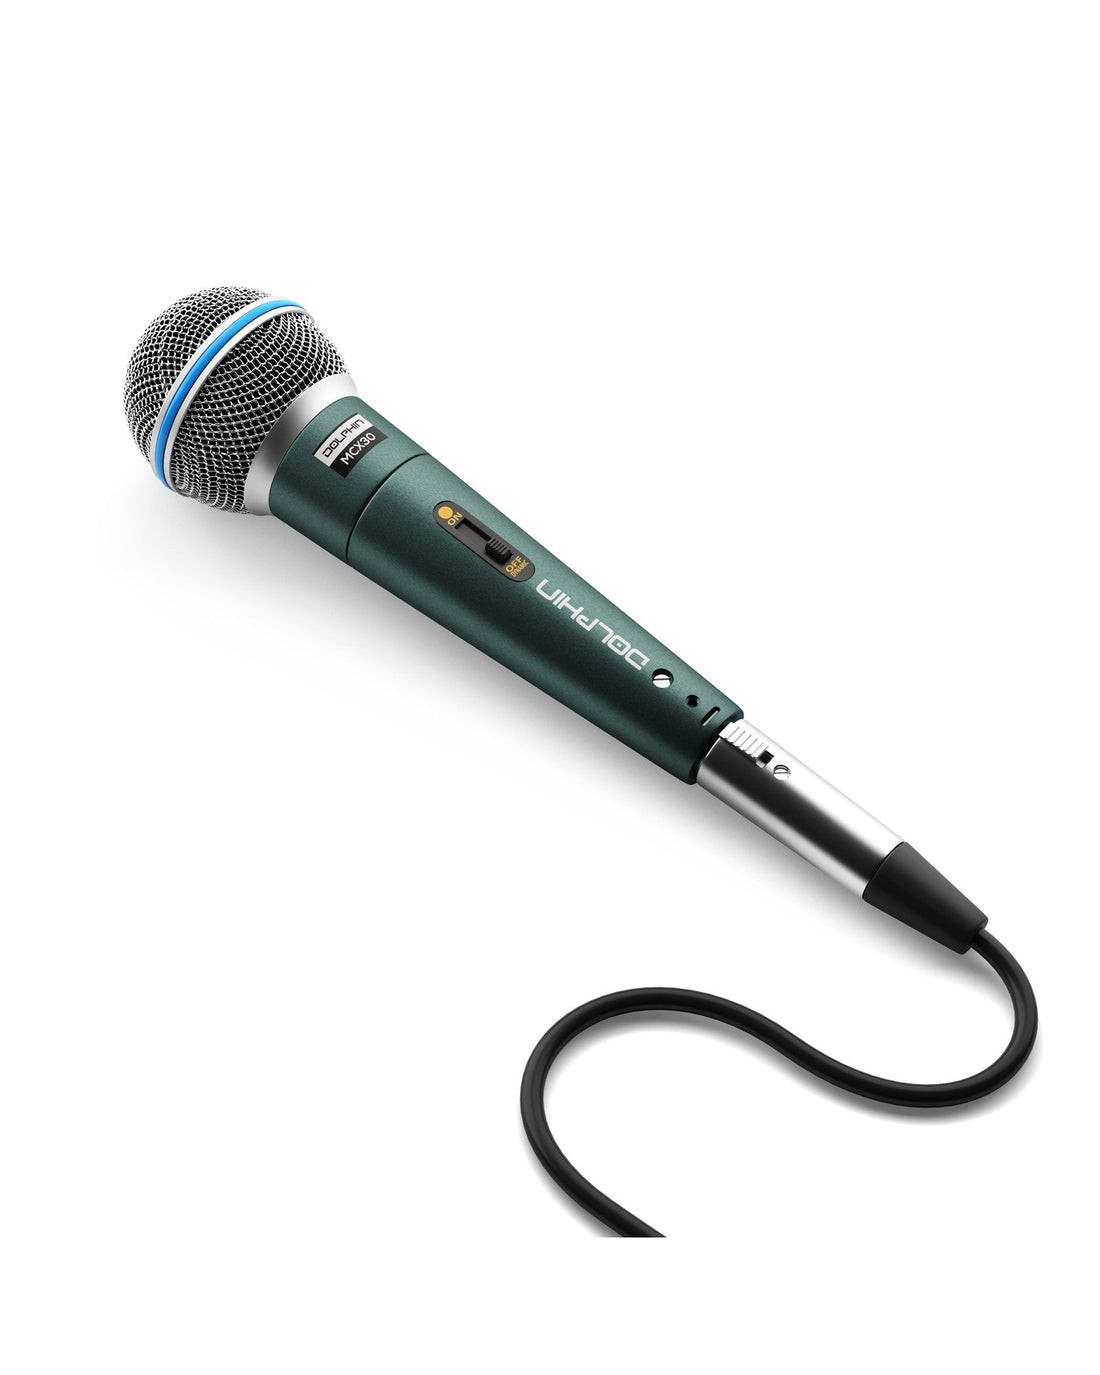 Dolphin MCX30 Karaoke Microphone, Handheld Dynamic Vocal Microphone for Speaker, Detachable 14ft XLR Cable, Mic Stand Clip, and Carry Case - Top ElectrosMicrophonesMCX30810059430235